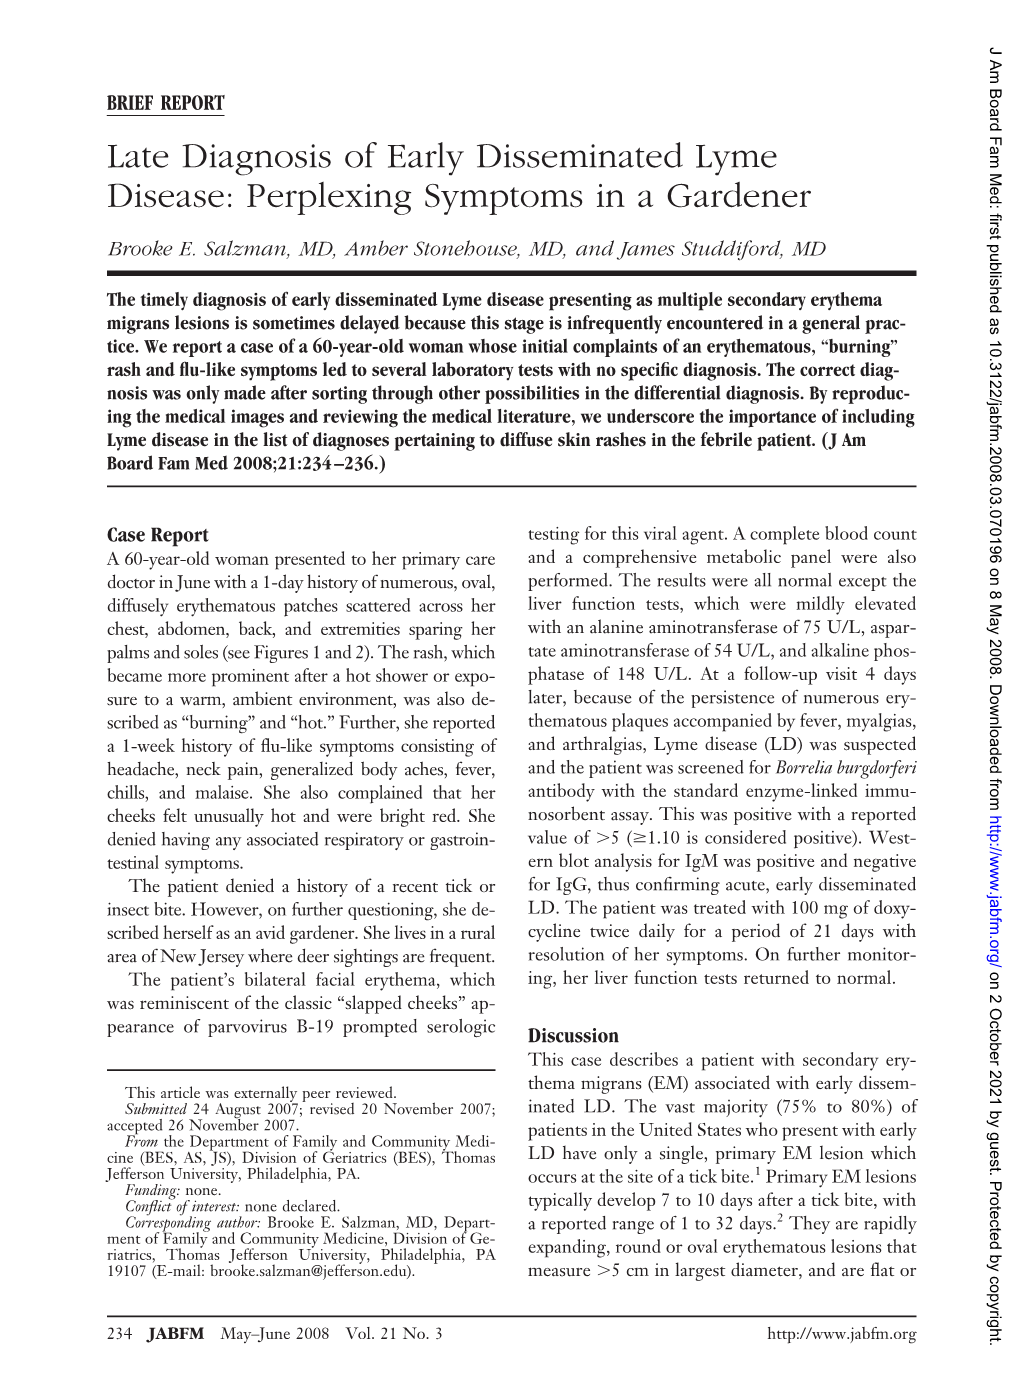 Late Diagnosis of Early Disseminated Lyme Disease: Perplexing Symptoms in a Gardener